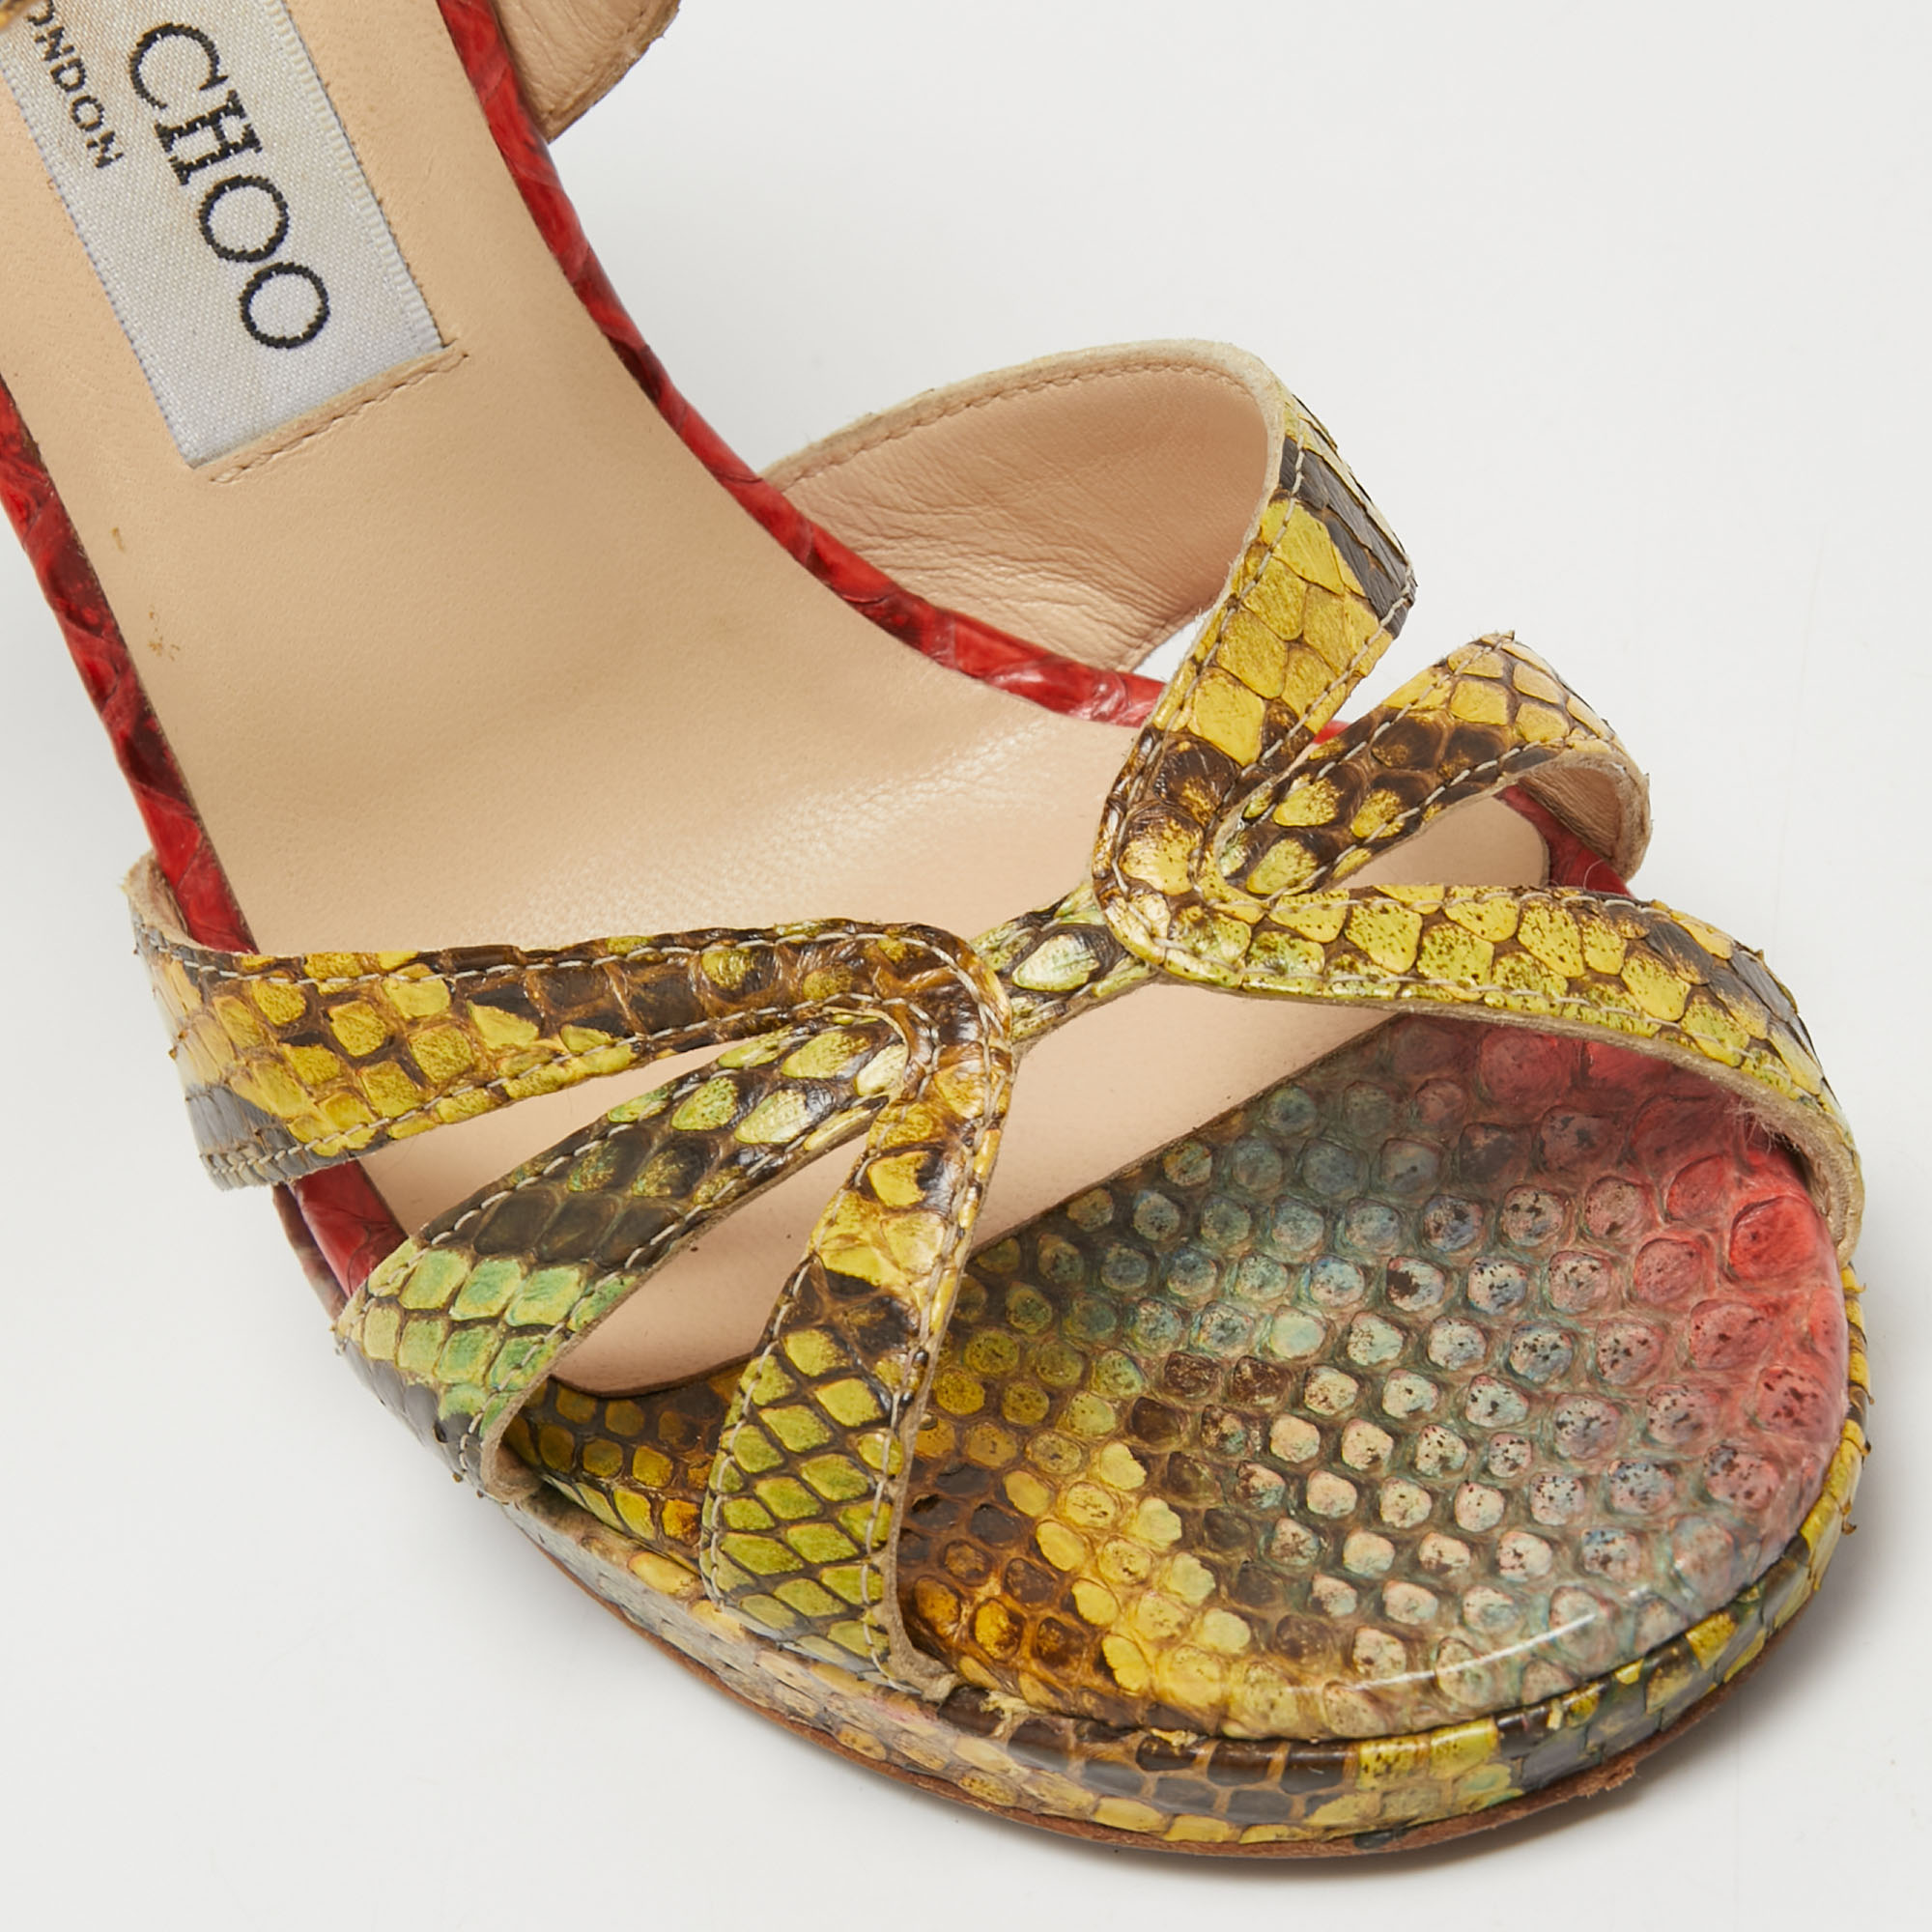 Jimmy Choo Multicolor Python Embossed Leather Ankle Straps Open Toe Sandals Size 37